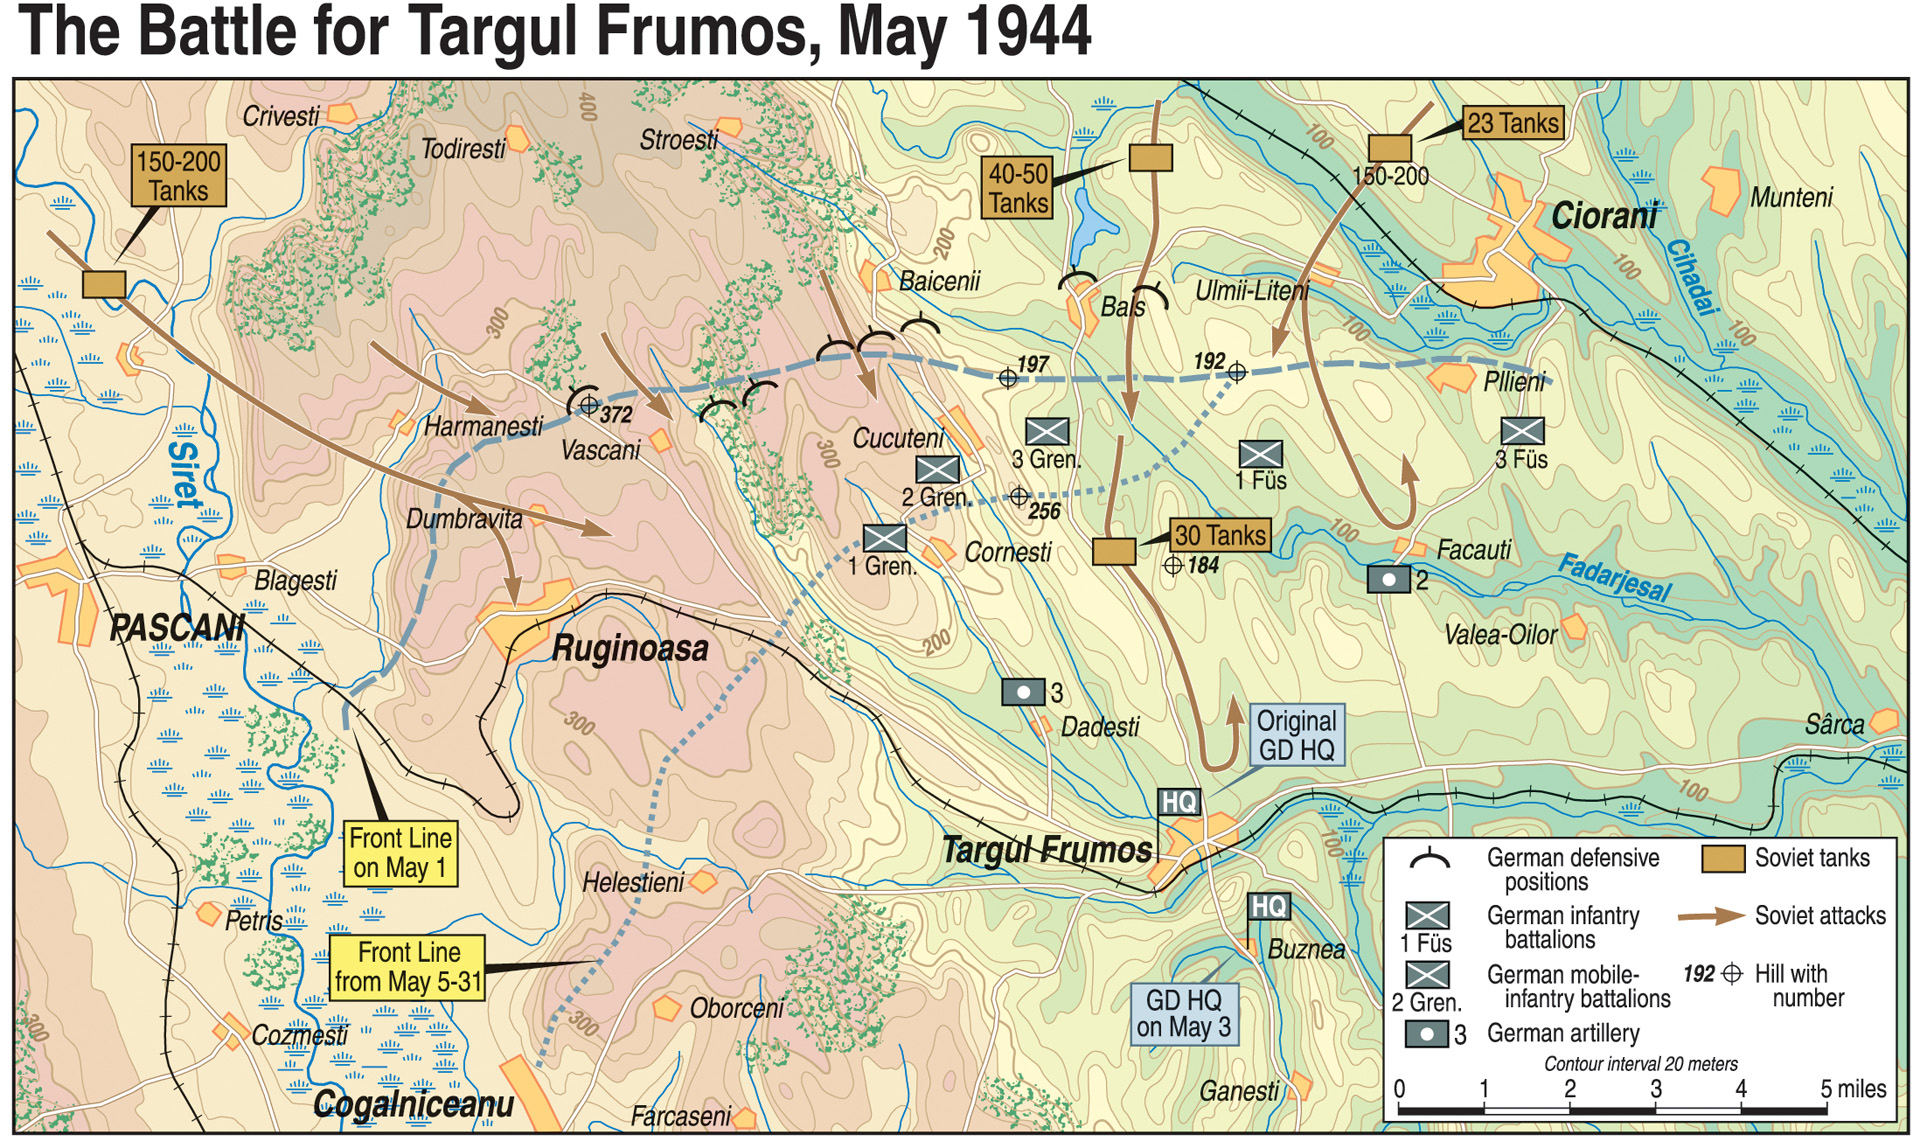 At Targul Frumos, German forces fought a textbook defensive action against the Soviets. 